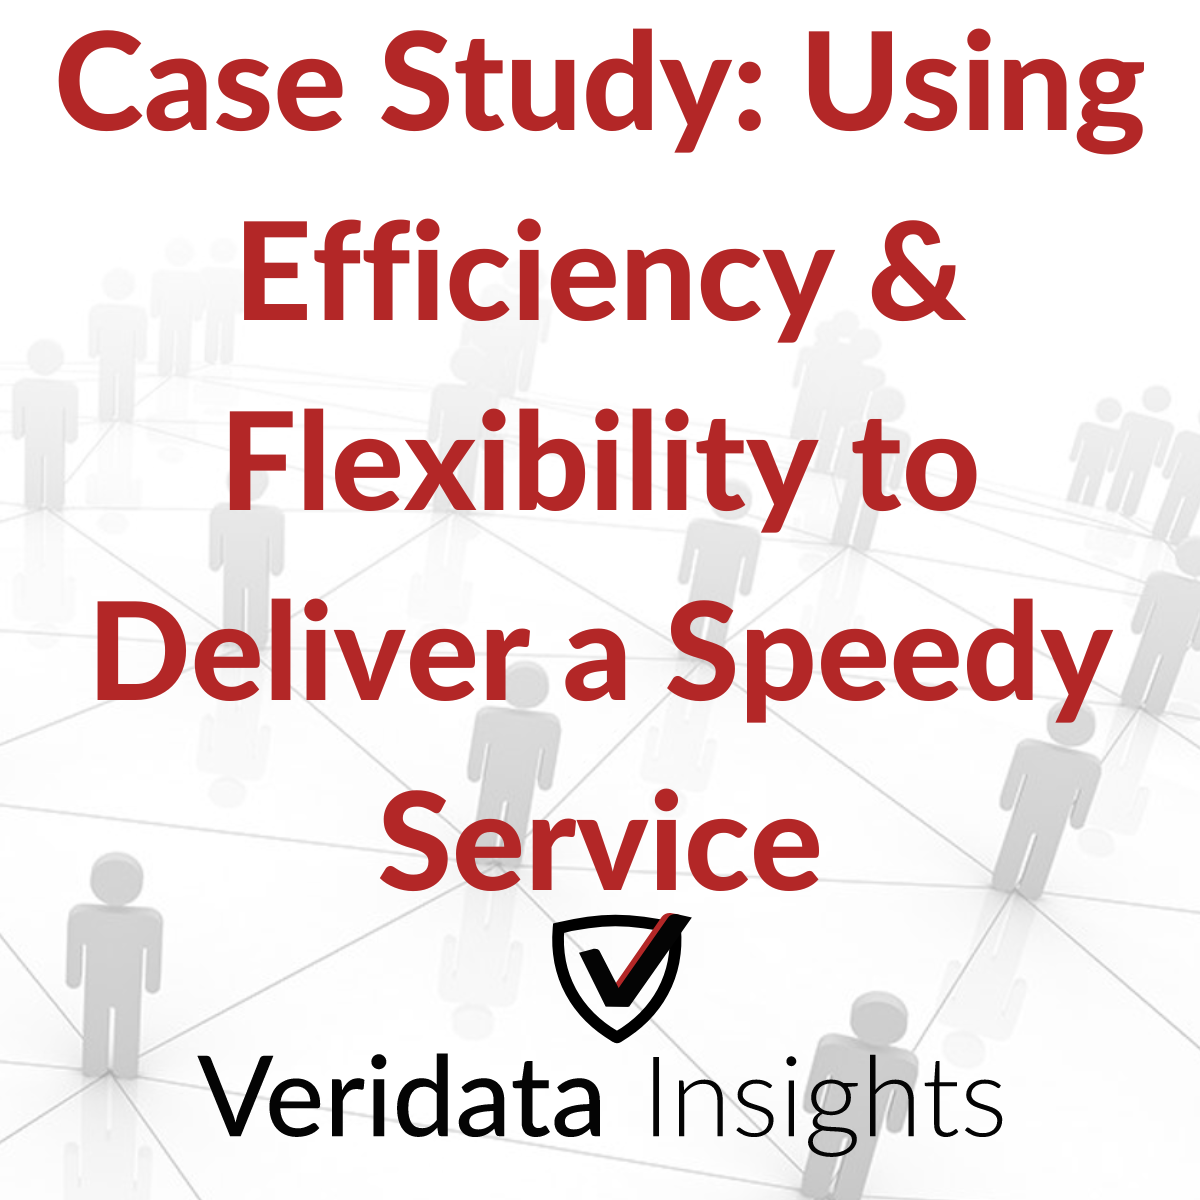 Case Study: Using Efficiency & Flexibility to Deliver a Speedy Service